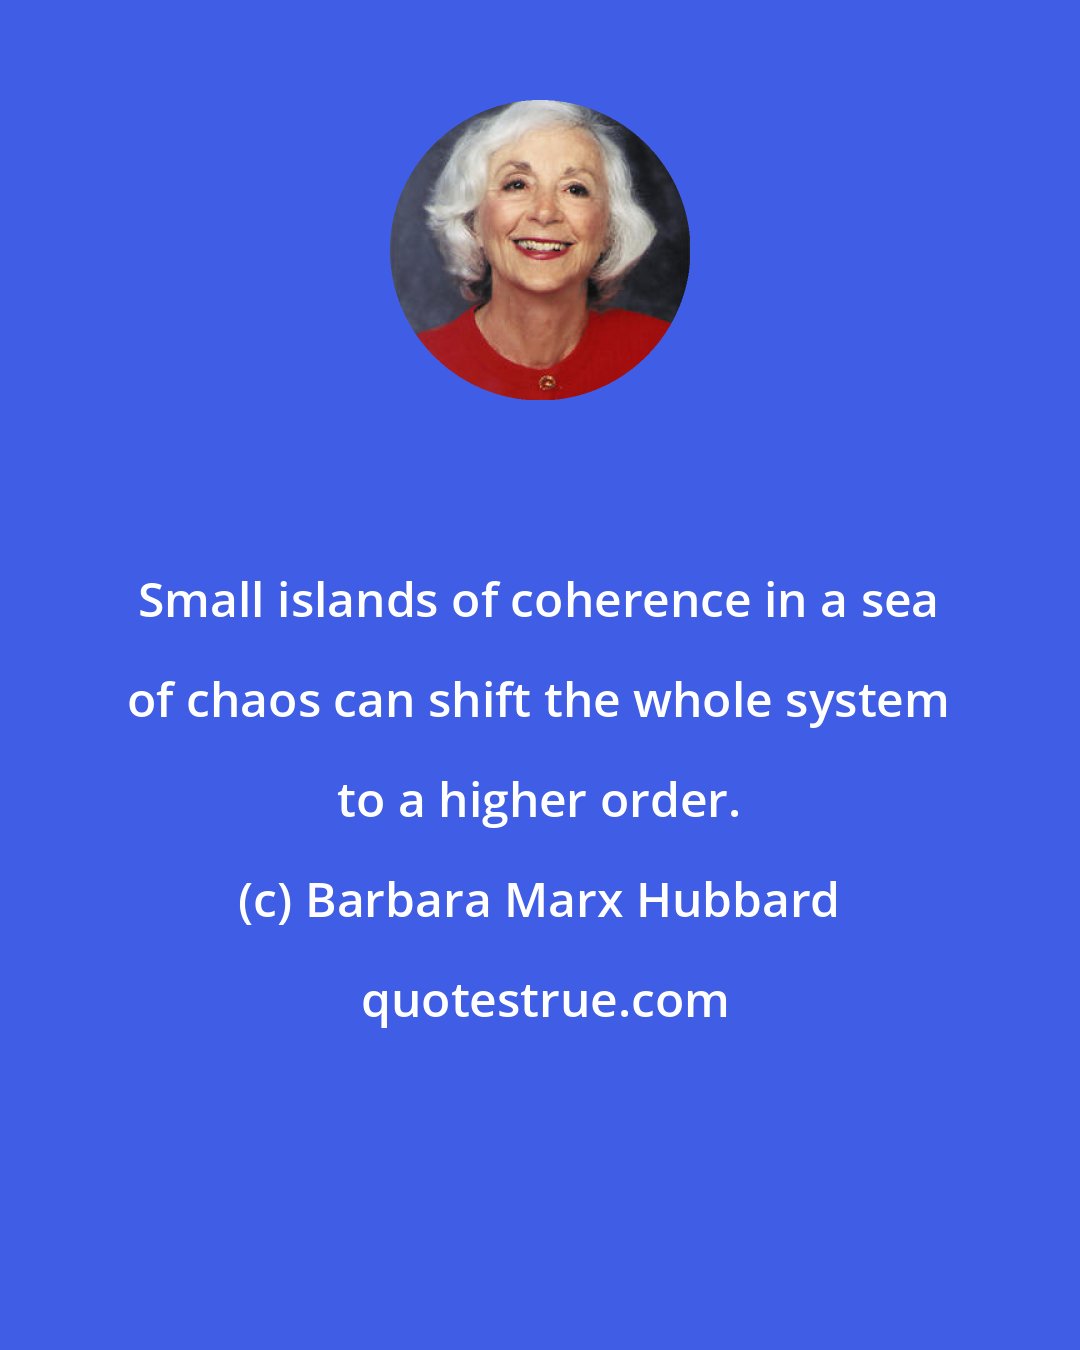 Barbara Marx Hubbard: Small islands of coherence in a sea of chaos can shift the whole system to a higher order.